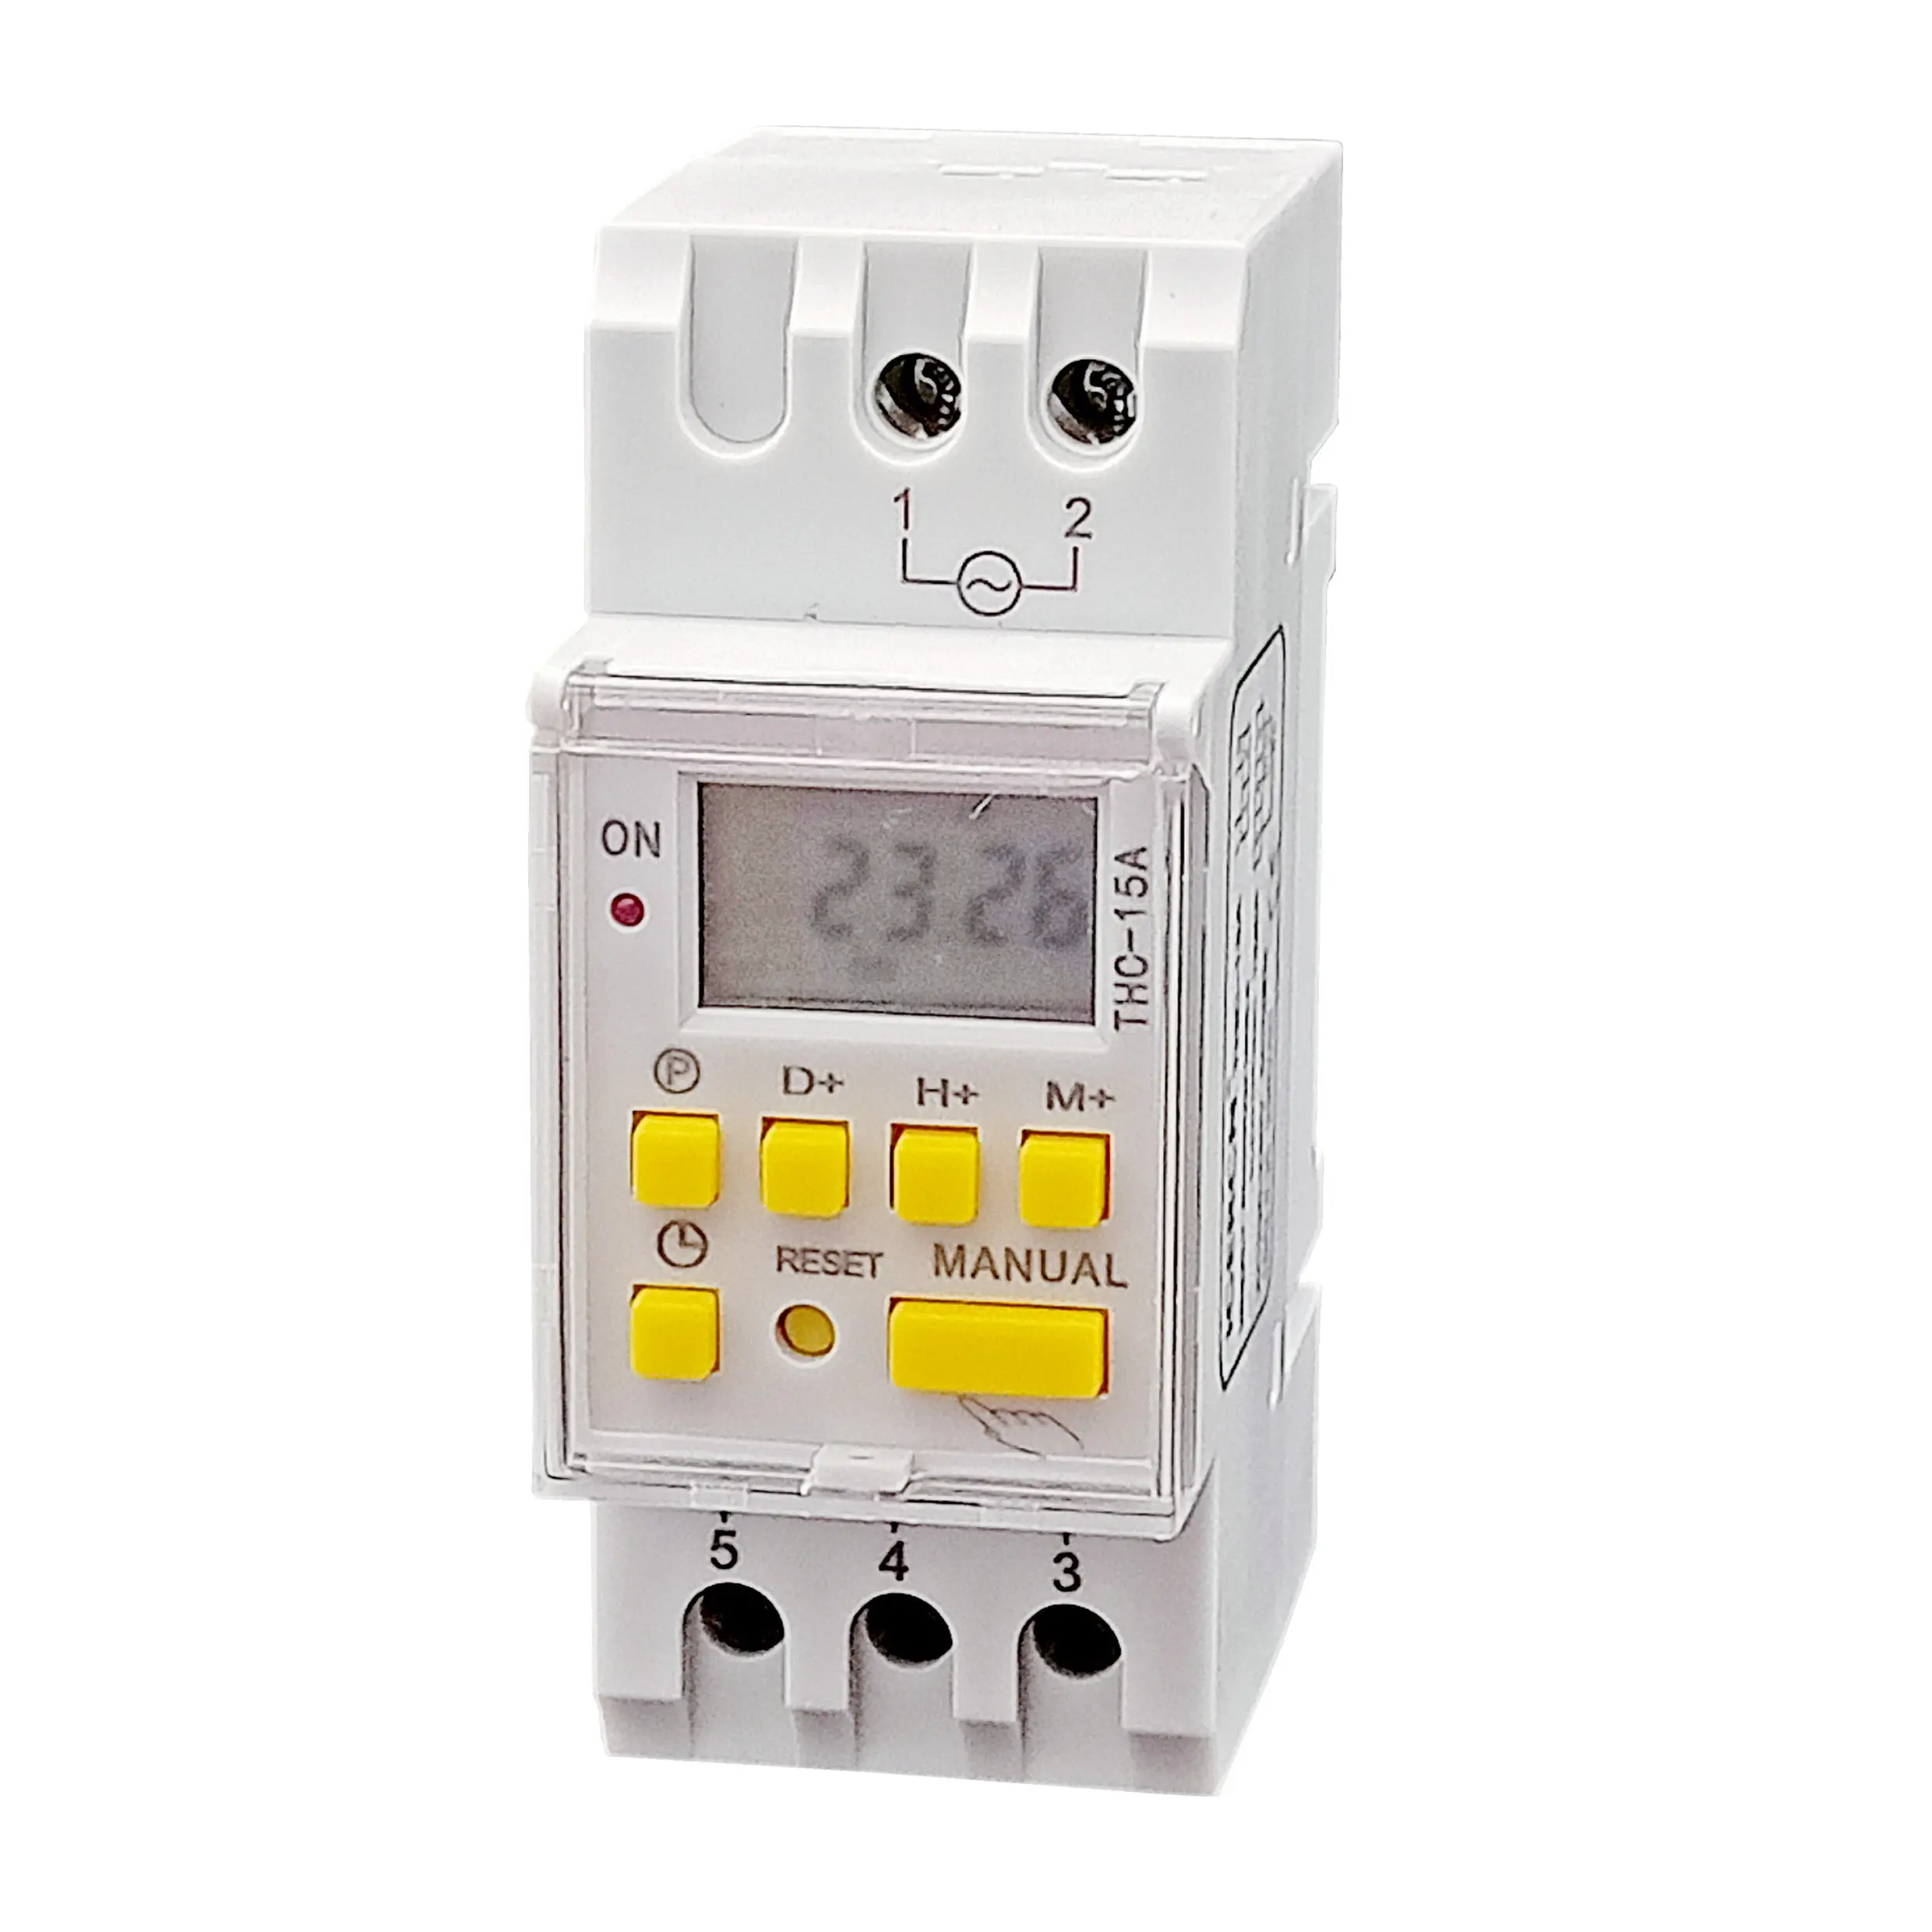 Programmable Time Switch Time Control Switch THC-15A 24VDC 16amp Socket Plug Timer Switch Control